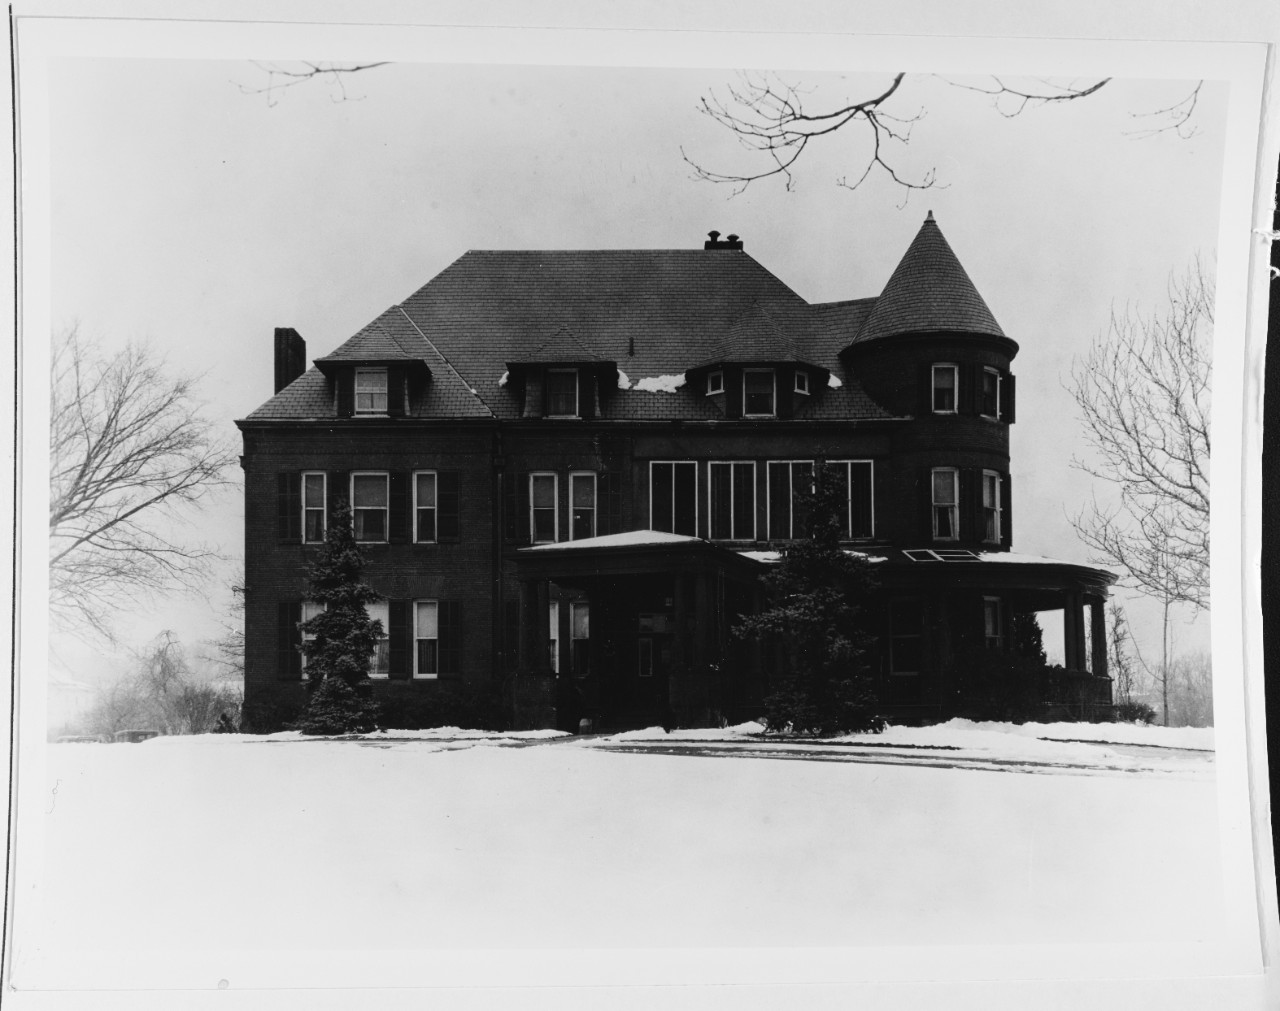 "Admirals House", Washington, District of Columbia, 13 February 1933.